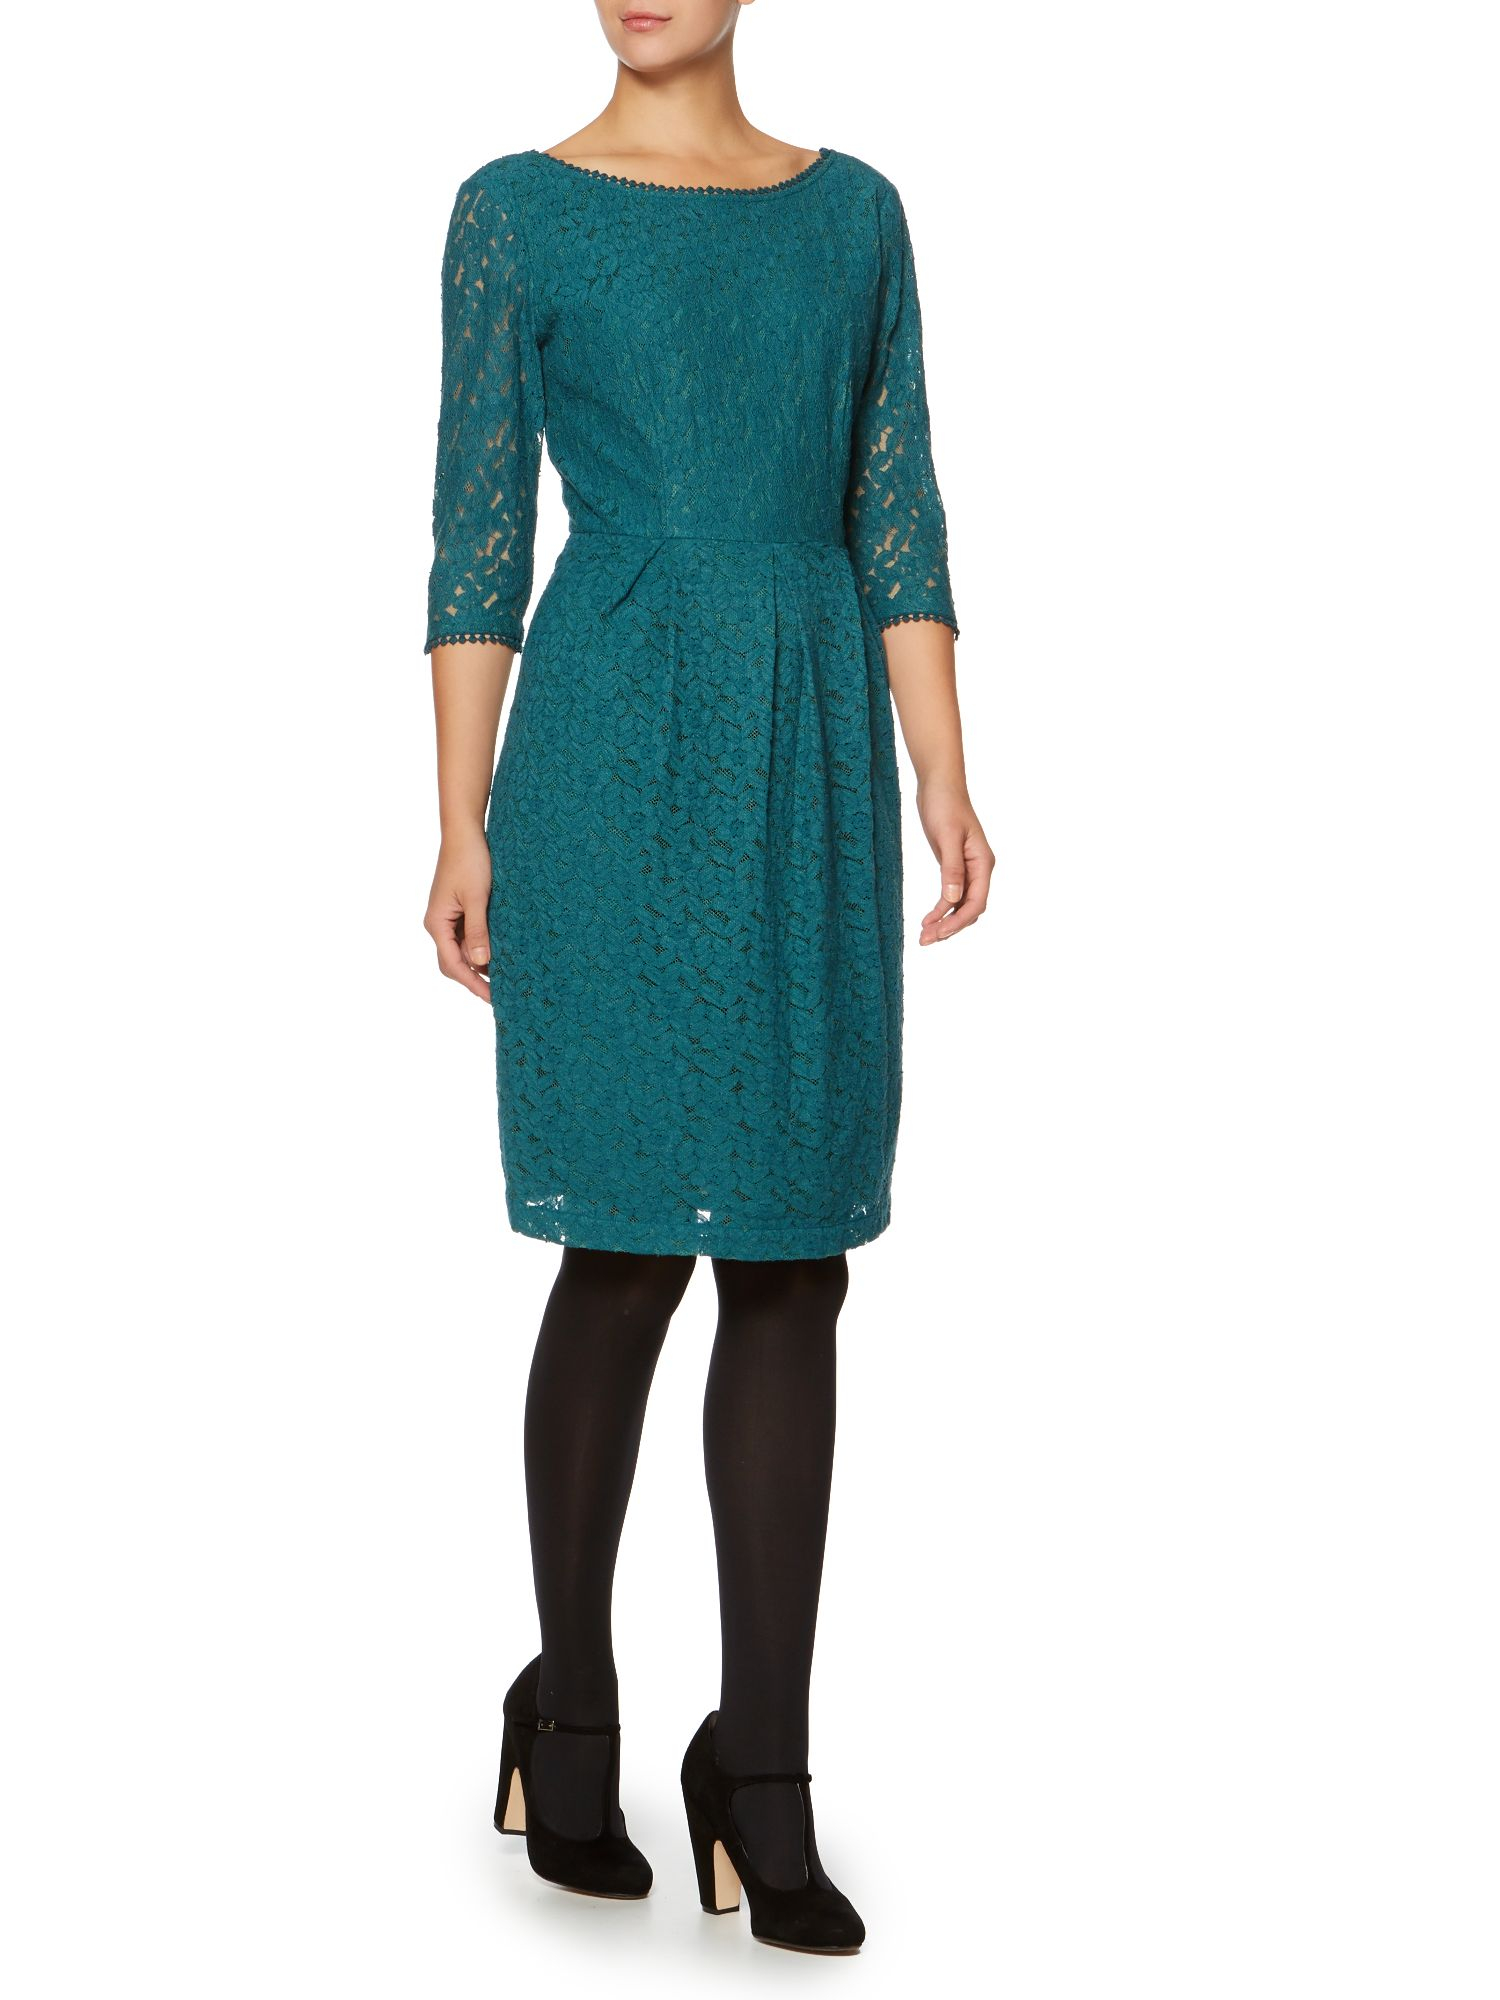 Dickins & jones Floral Lace Dress in Green | Lyst